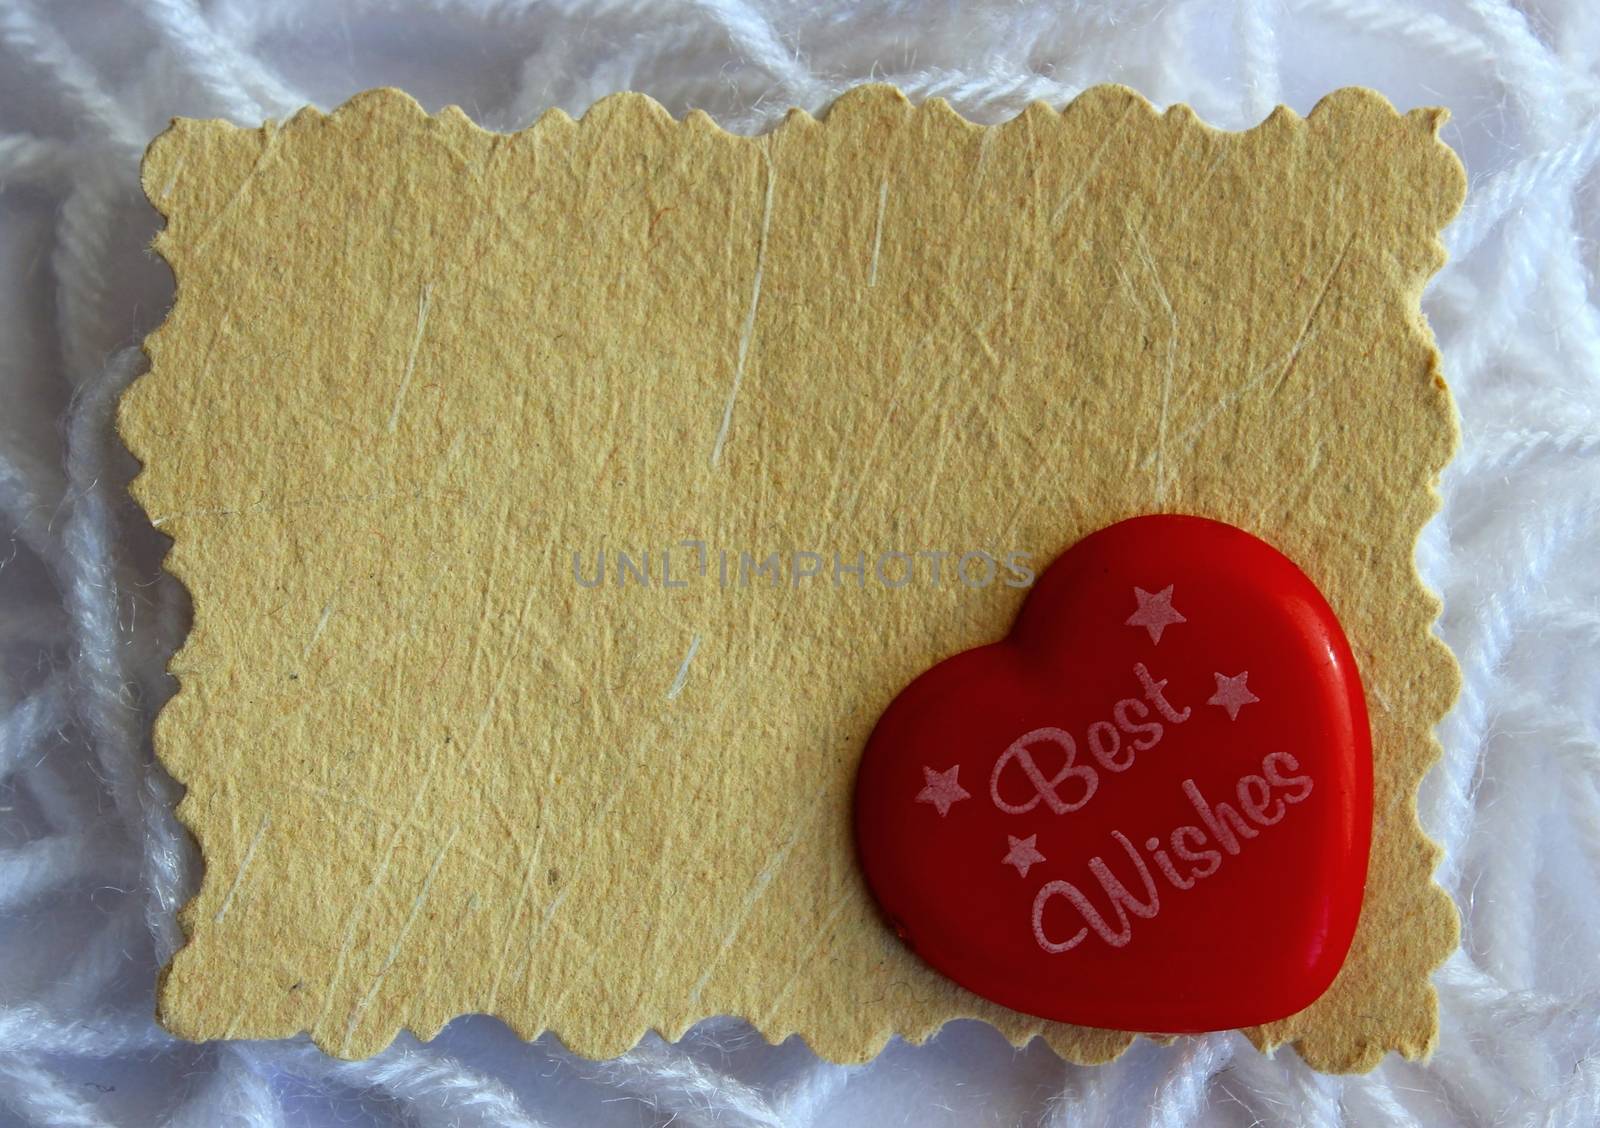 A blank hand made paper message note card, with a tiny red plastic heart that reads ' best wishes', against strands of white wool yarn
